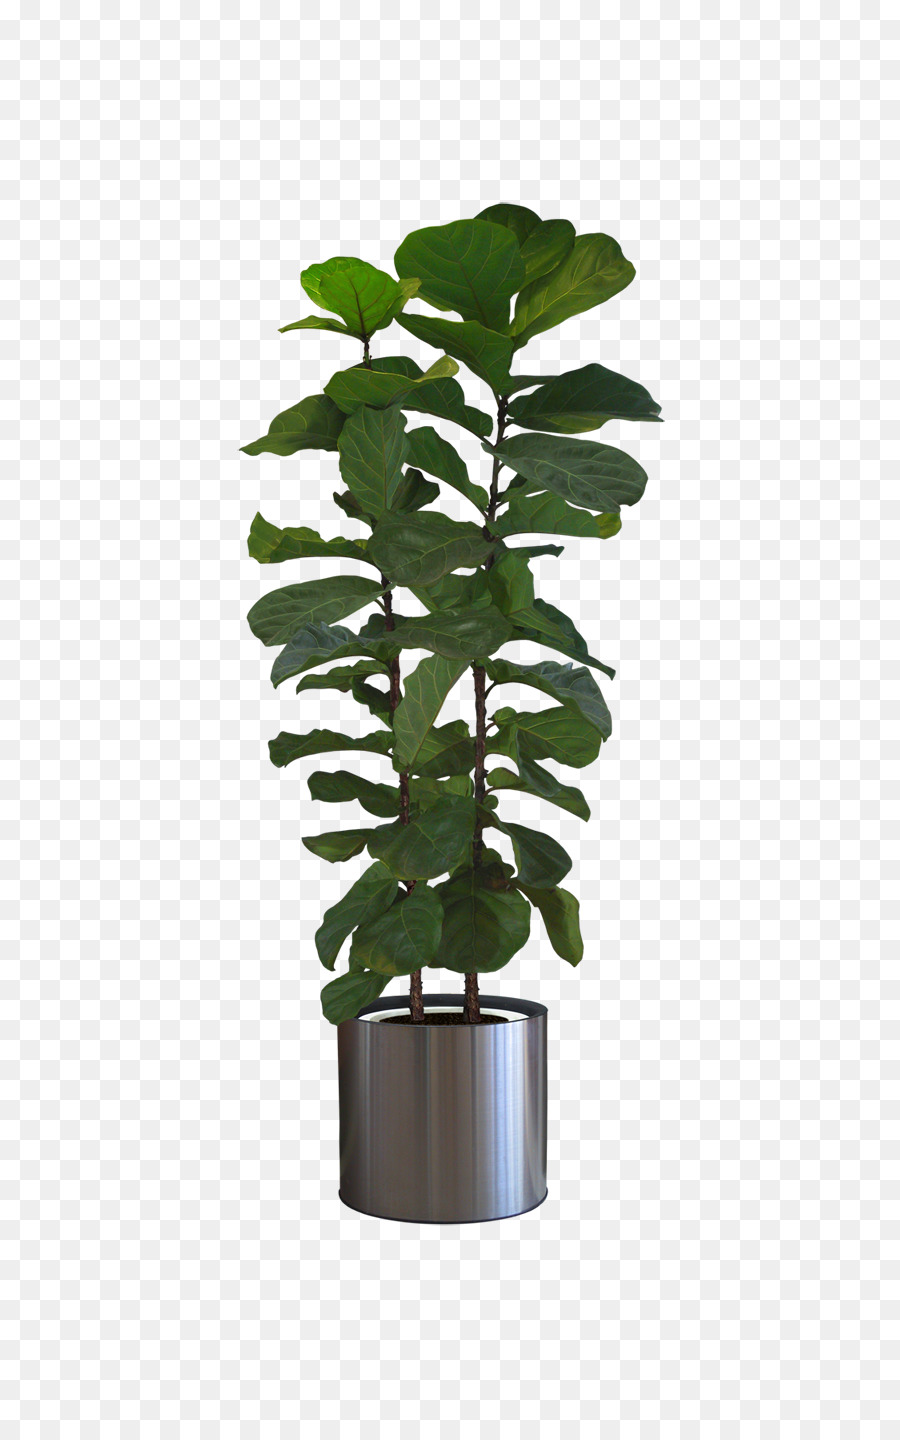 Icon - Potted plants png download - 744*1428 - Free Transparent Plant png Download.